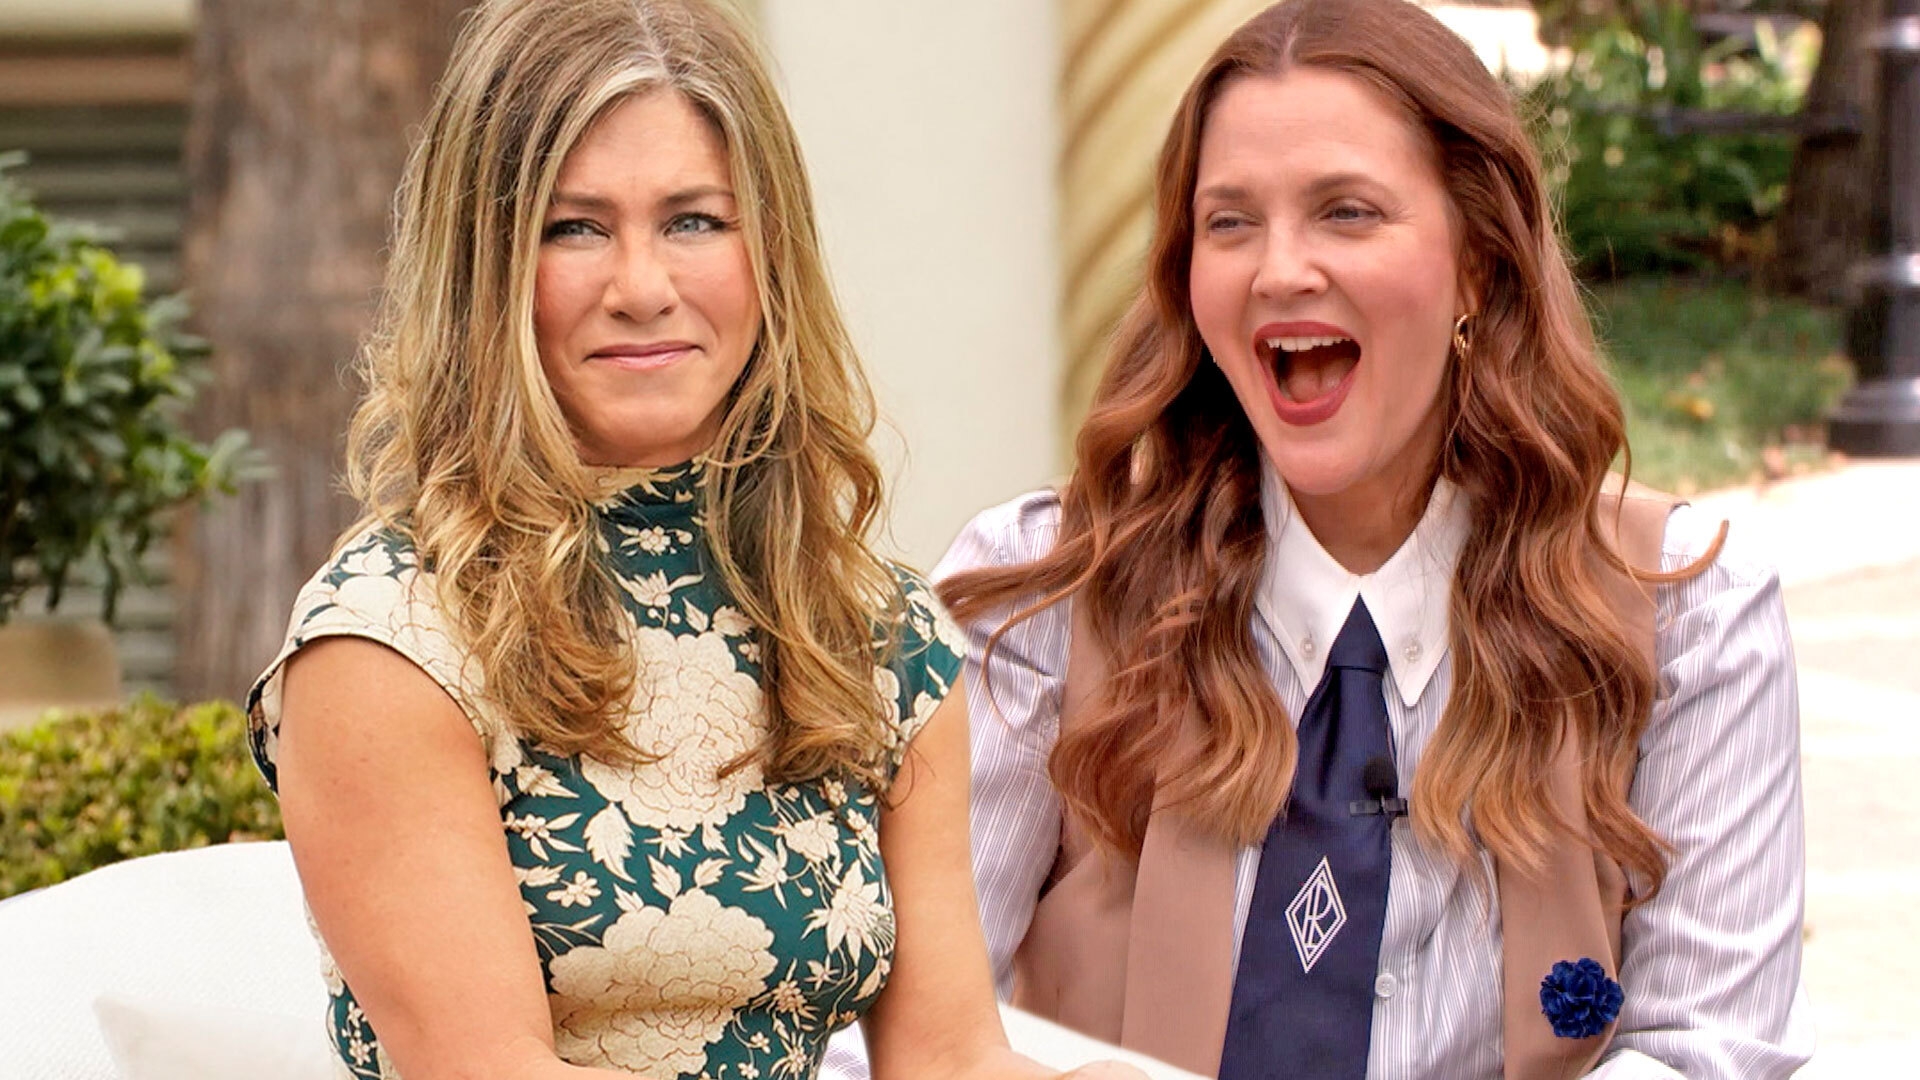 Drew Barrymore and Jennifer Aniston Used to Wear This Woman's Baby